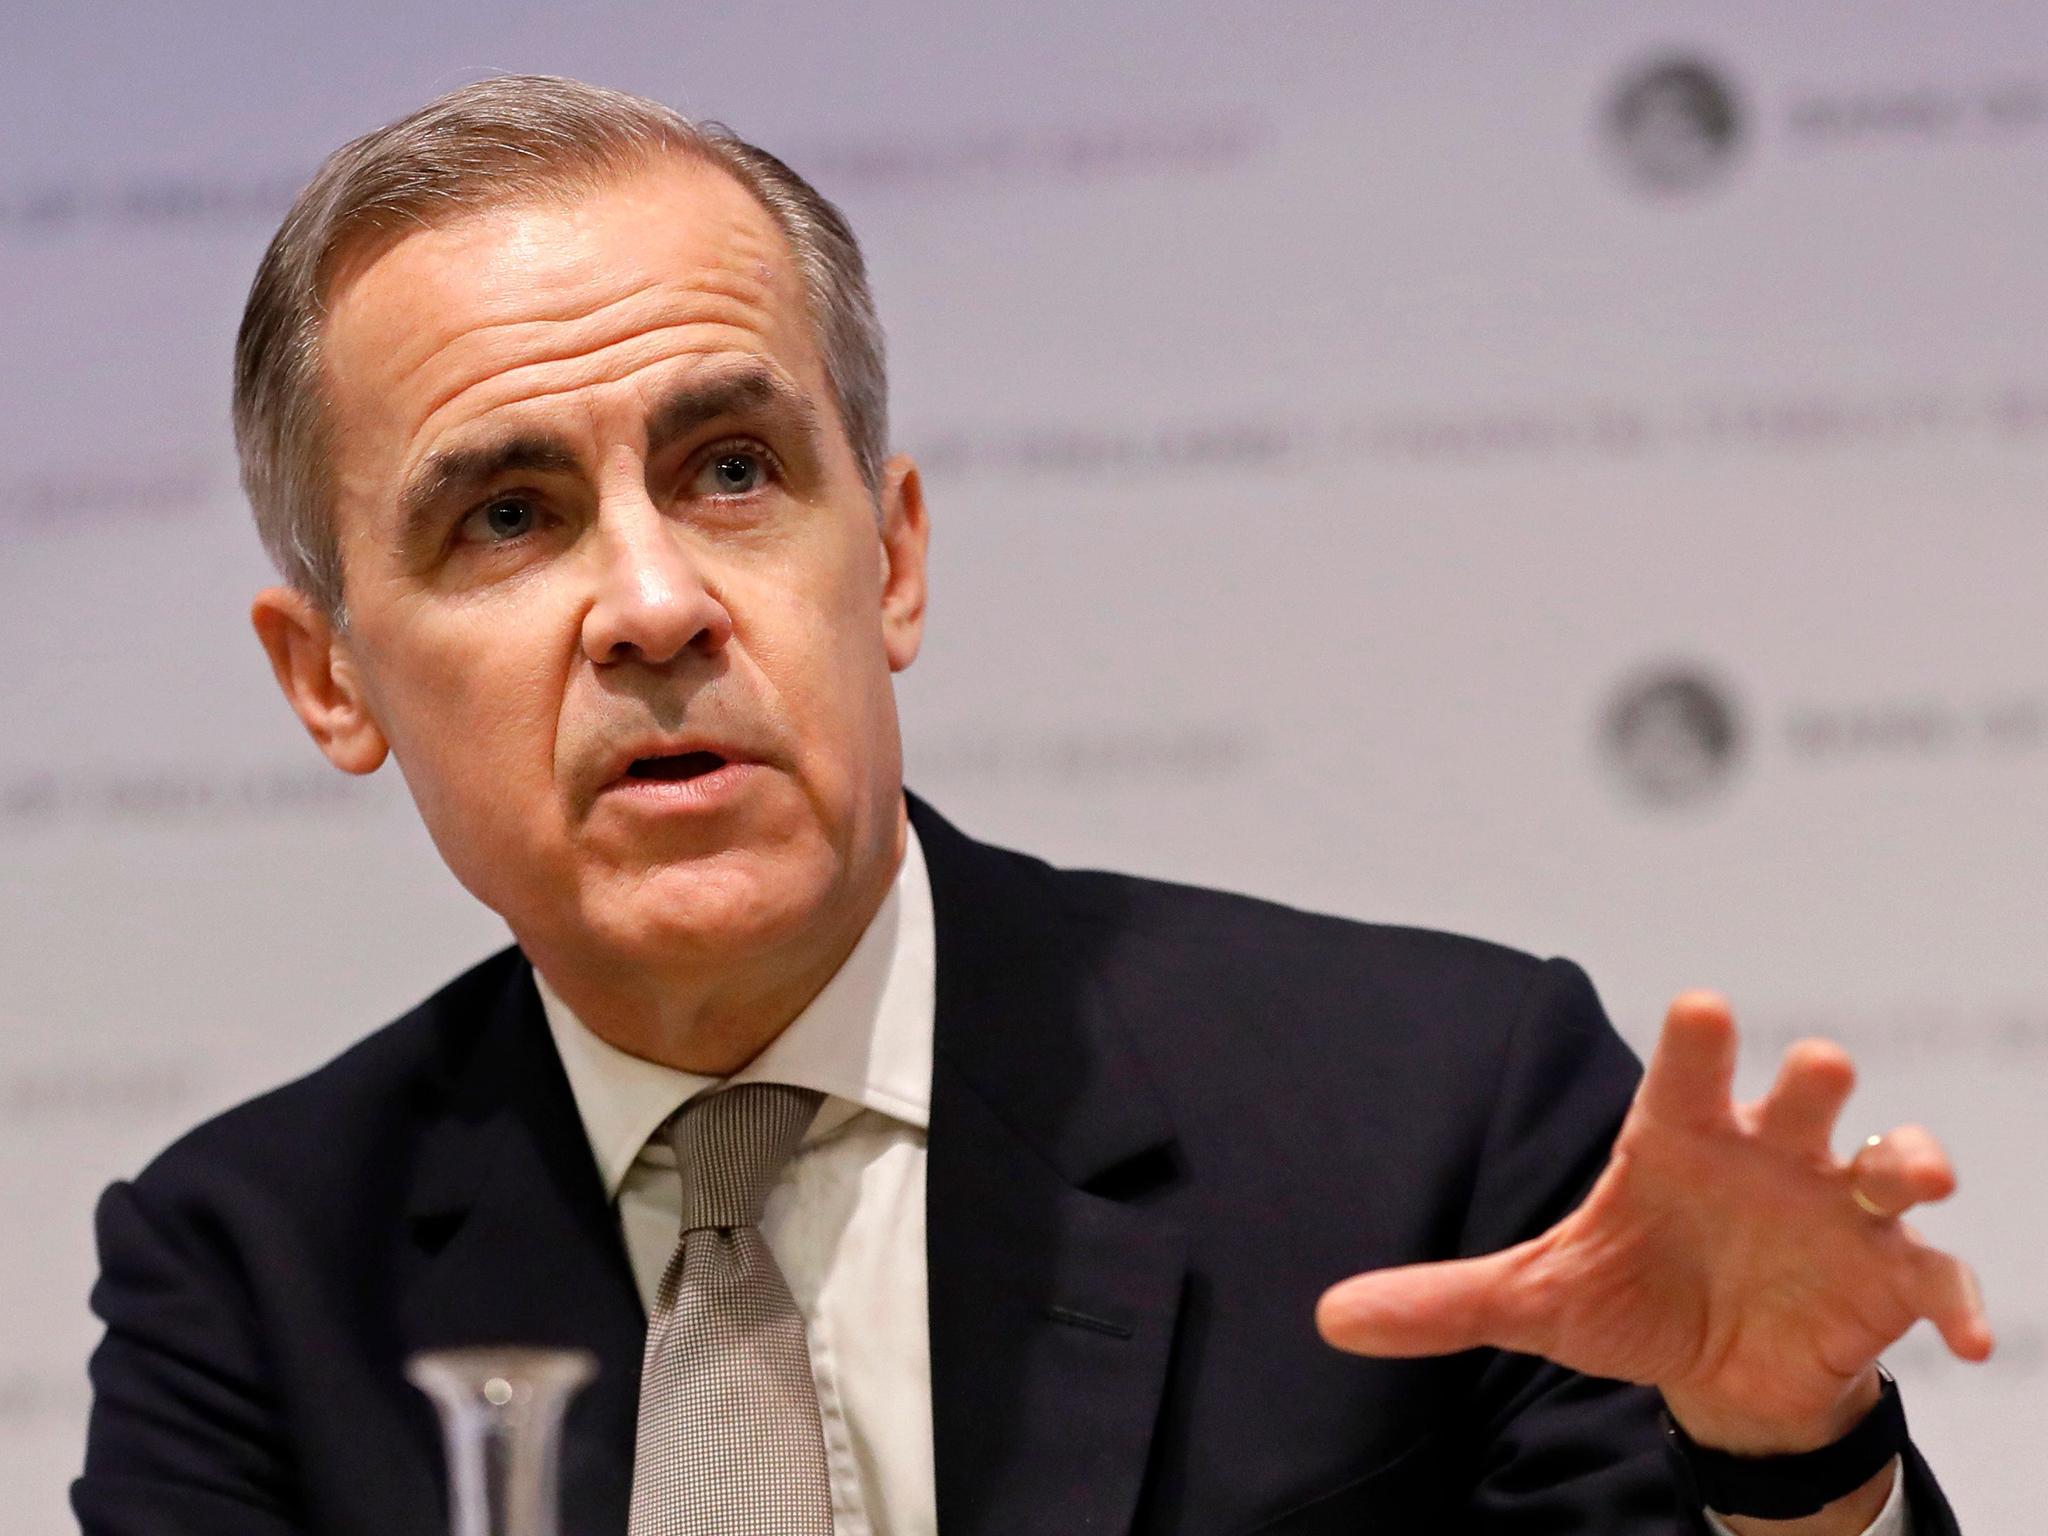 Recent comments of Bank of England governor Mark Carney have raised expectations of an interest rate cut